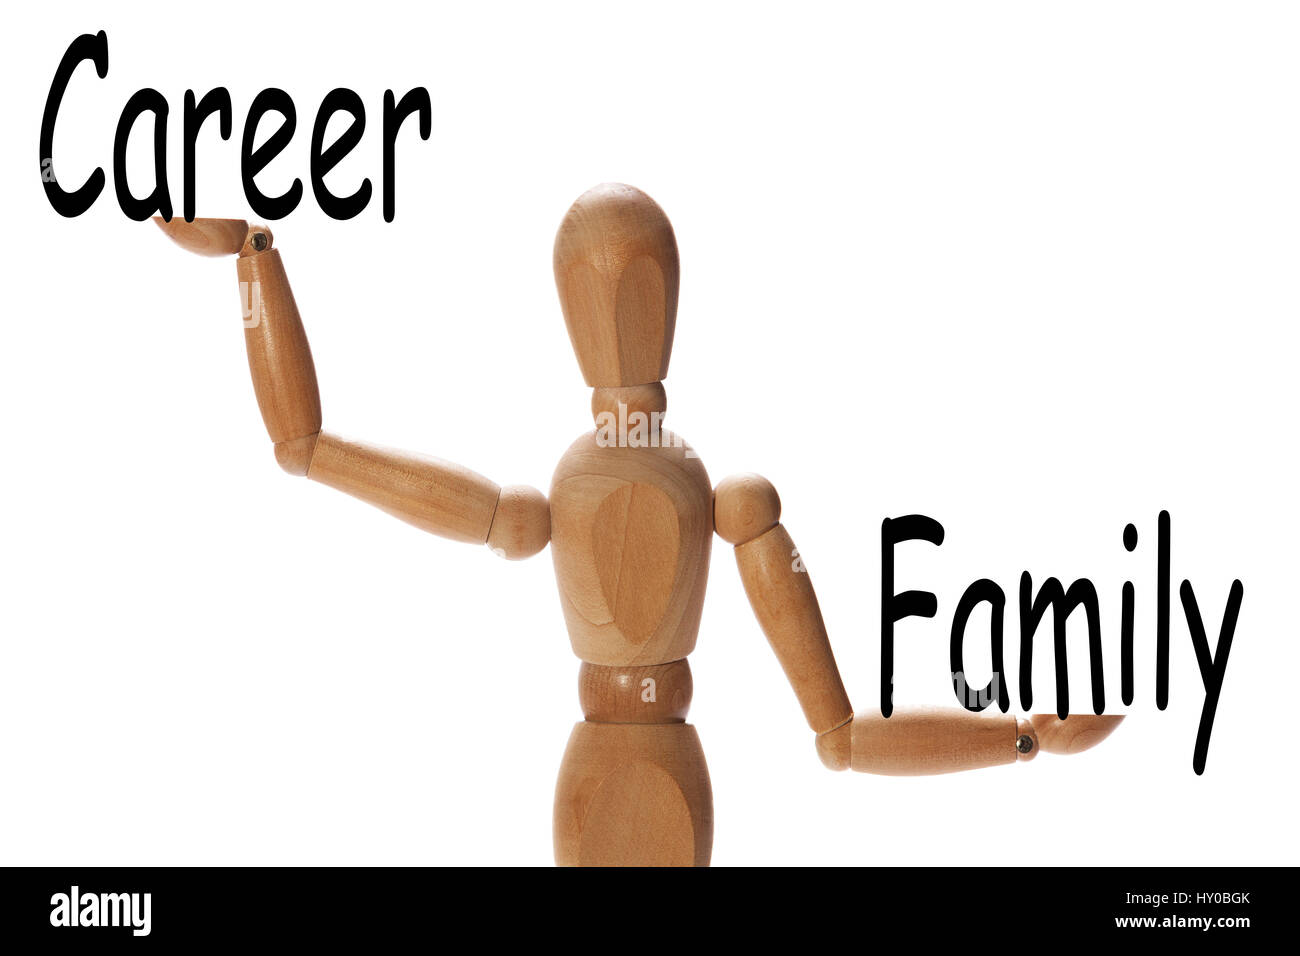 Mannequin measuring the importance of family versus the career on the palms of the hands Stock Photo